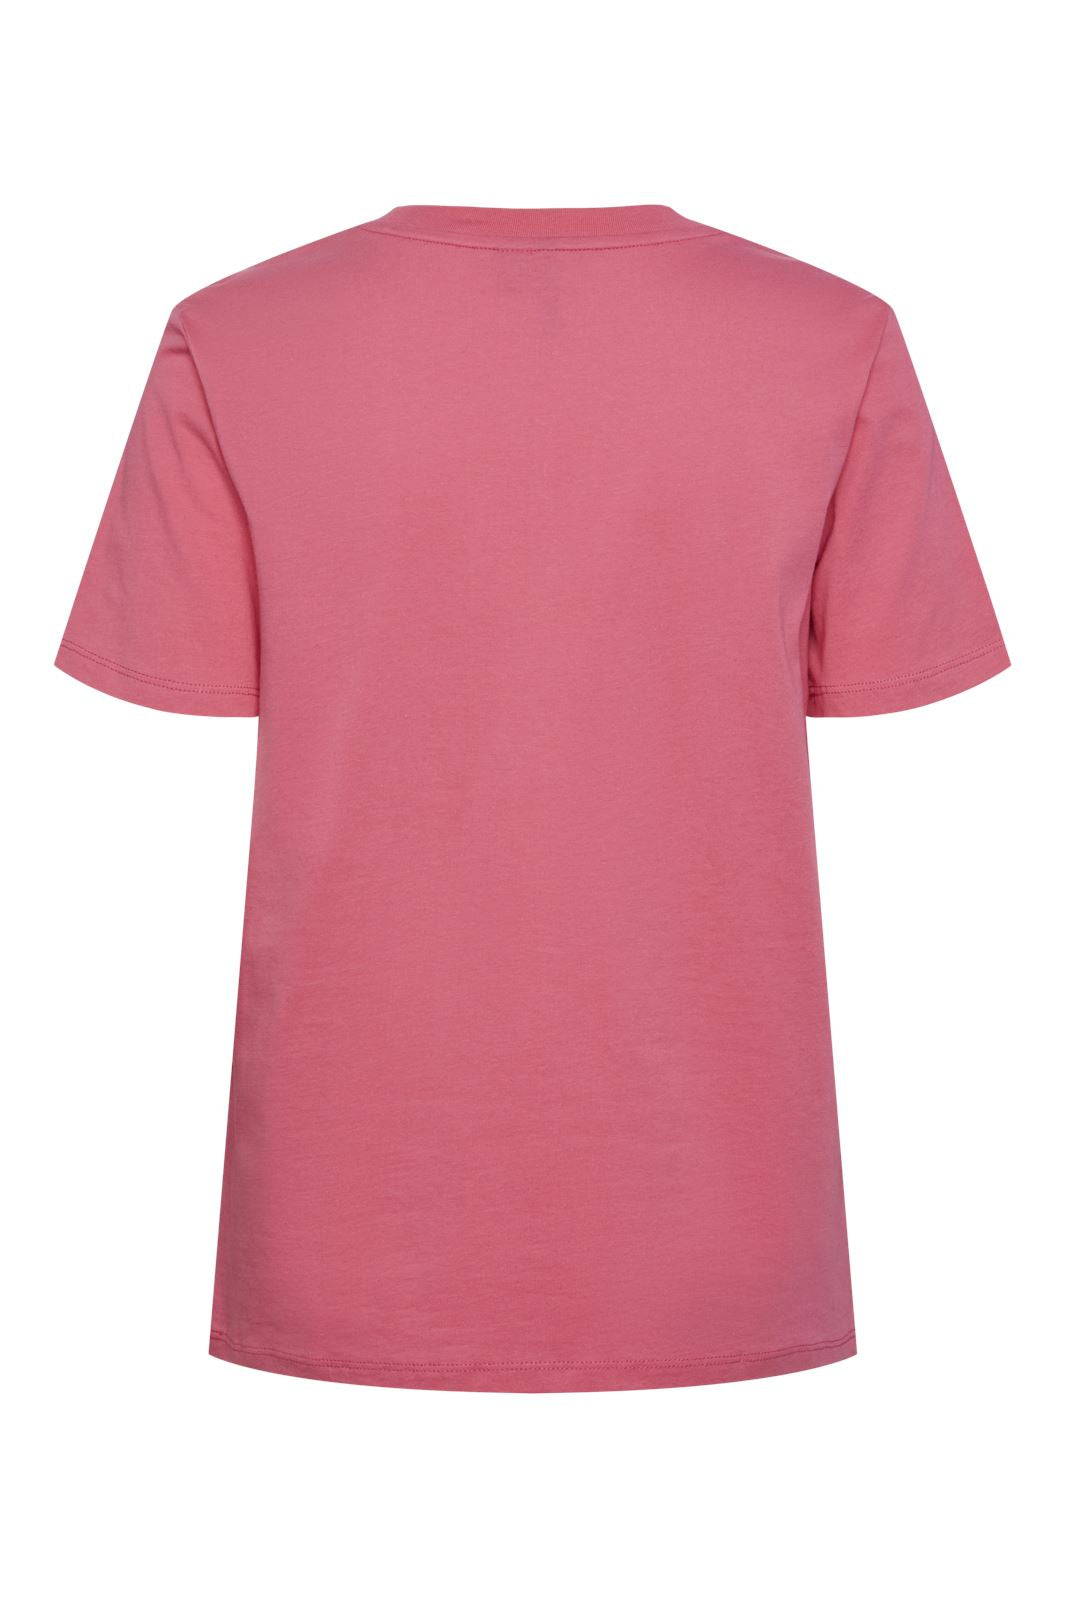 Pieces - Pcria Ss Solid Tee - 4386931 Hot Pink